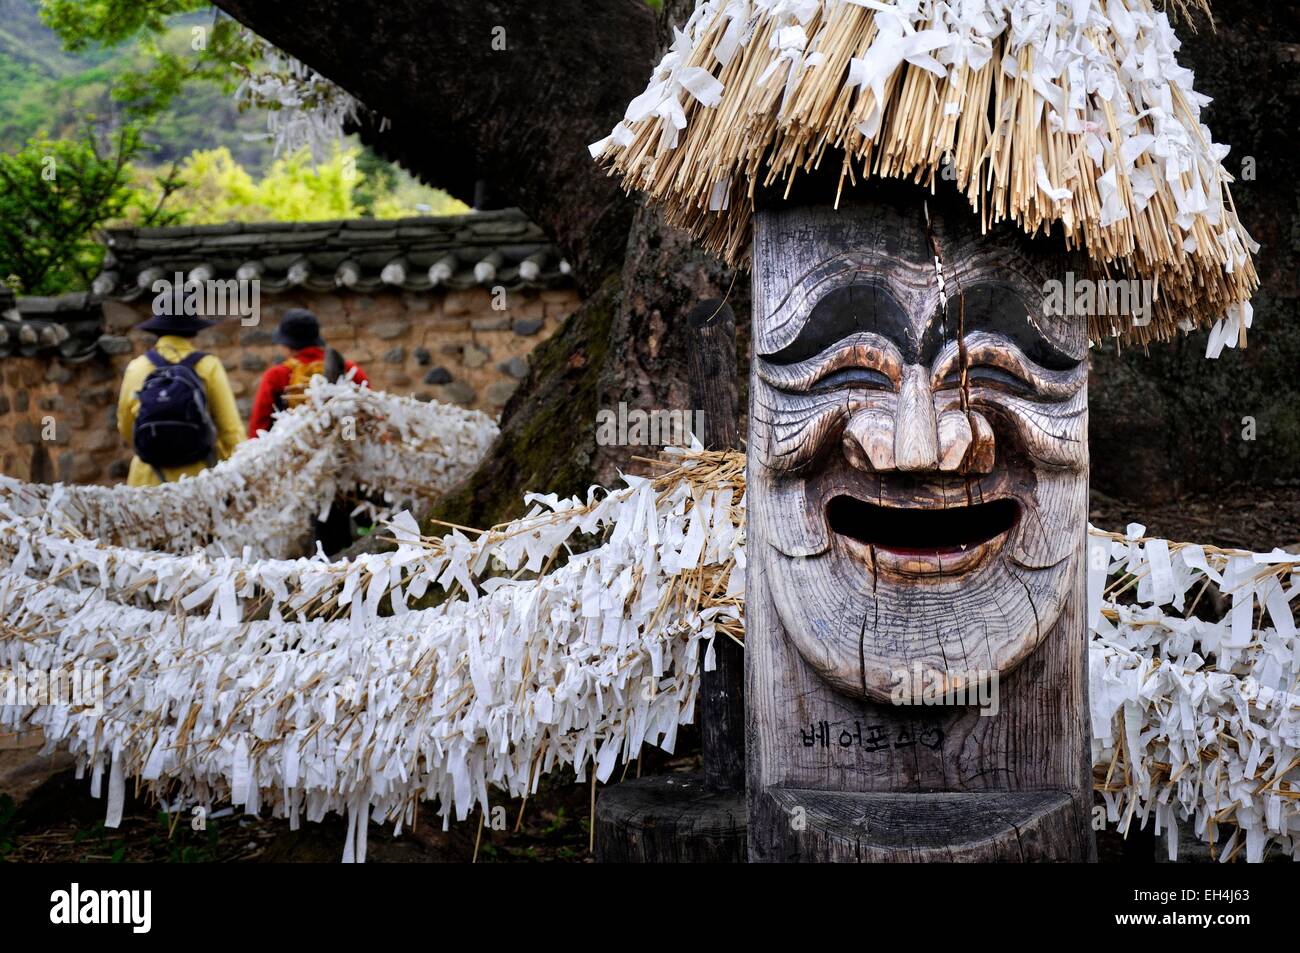 South Korea, North Gyeongsang Province (Gyeongsangbuk-do), Andong, Hahoe Folk Village listed as World Heritage by UNESCO, 600 years old Sinmok, a large and very old tree with a Jangseung, wooden totem pole with a laughing human face carved and a hat Stock Photo